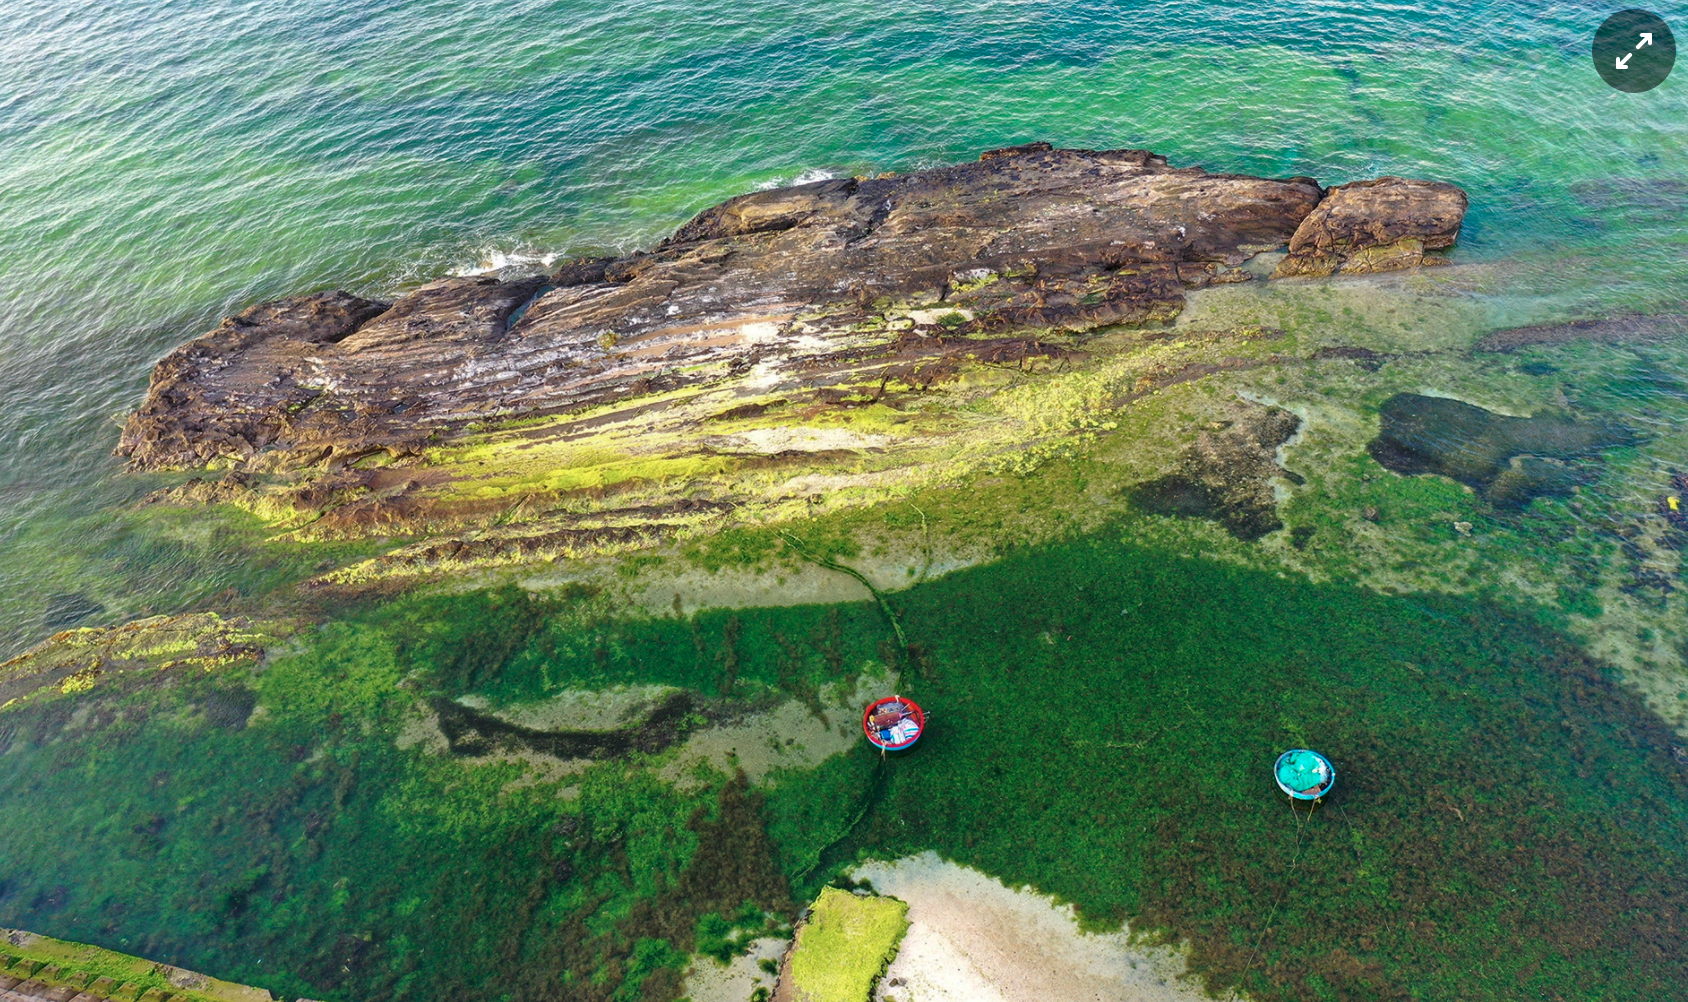 Vietnam off the beaten track - Ly Son Island dons its smooth green moss garb